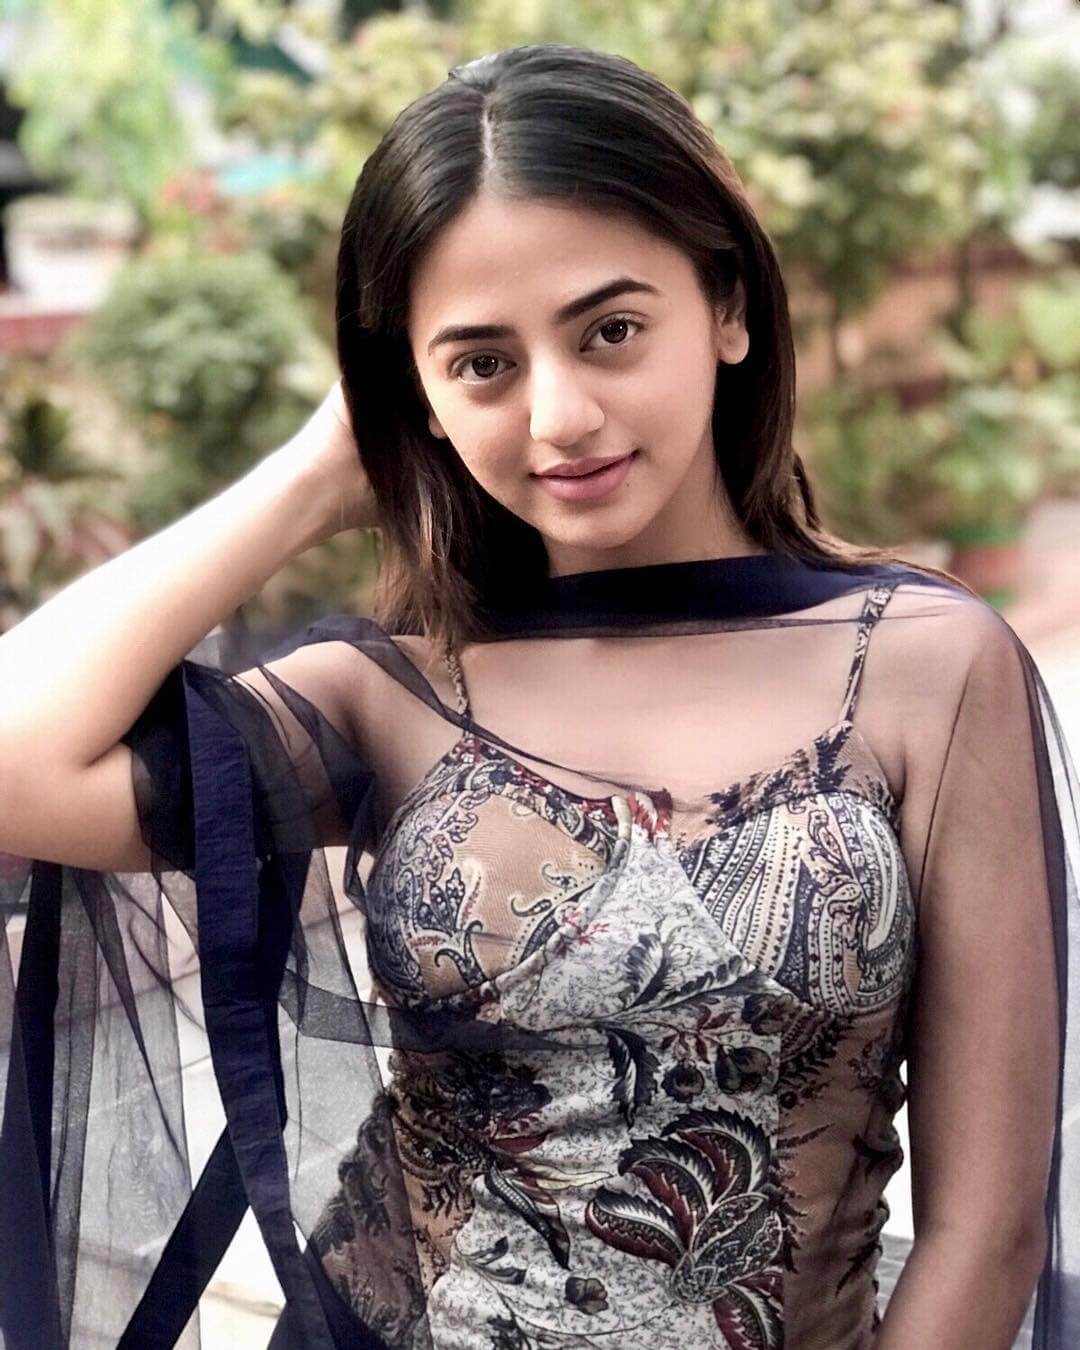 Helly Shah Images, Sexy Photo Gallery Albums and Hot Pics collection